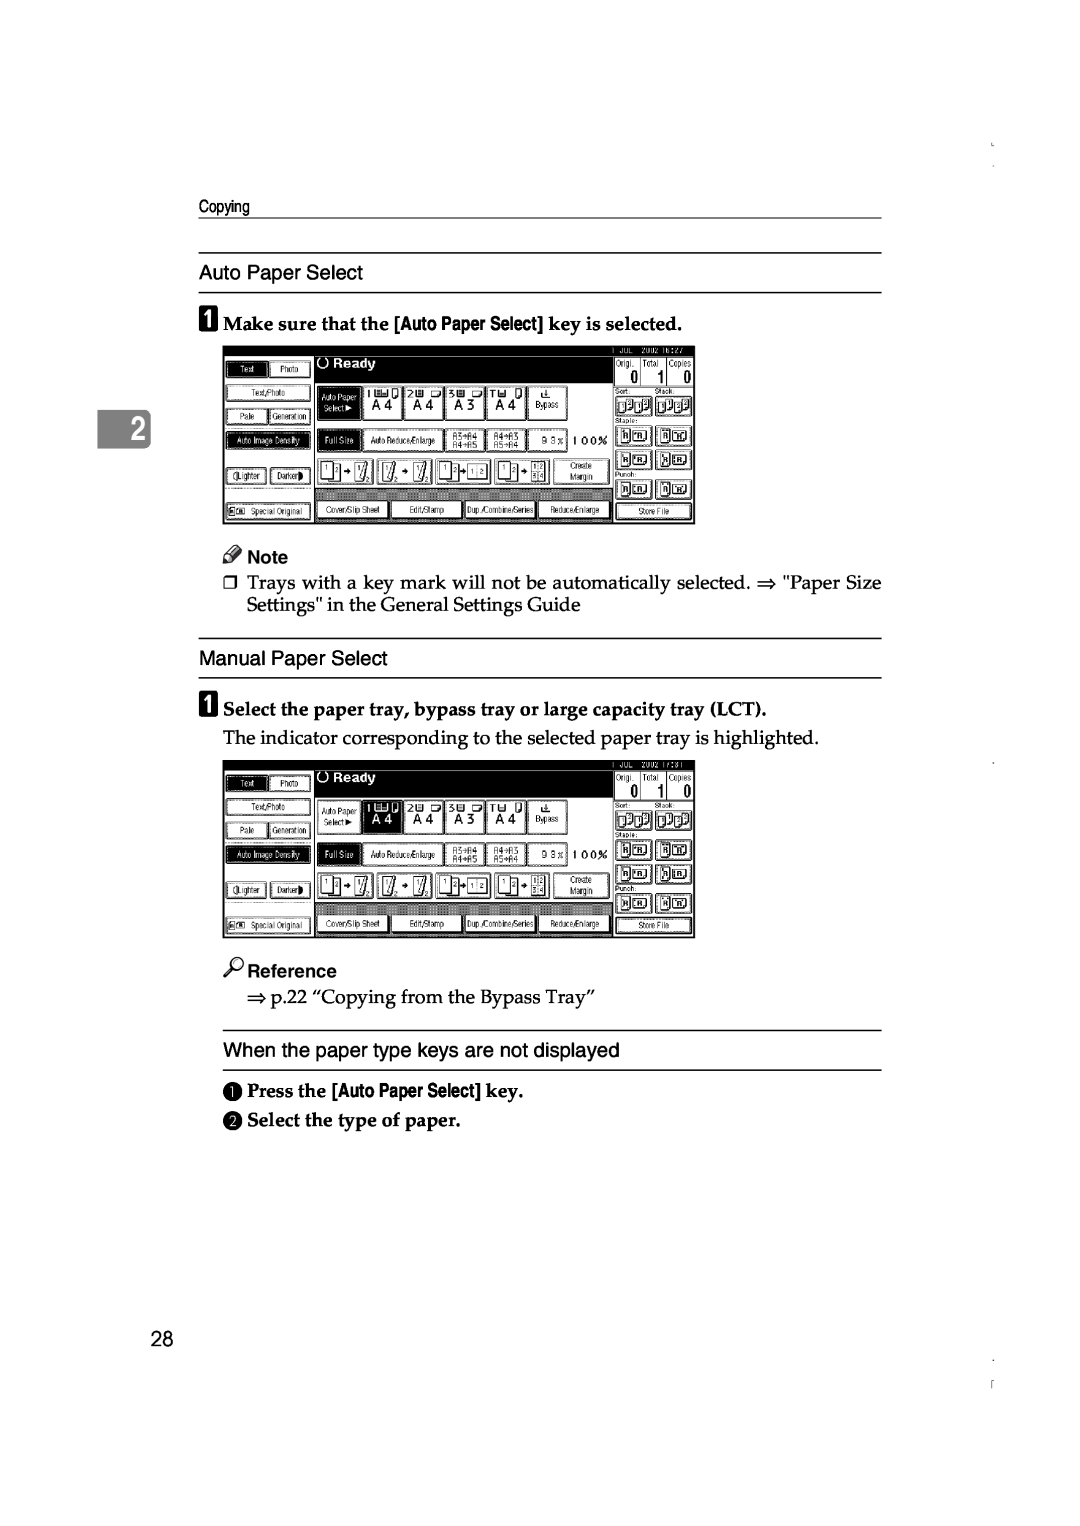 Lanier LD075, LD060 manual Auto Paper Select, Manual Paper Select, When the paper type keys are not displayed, Reference 